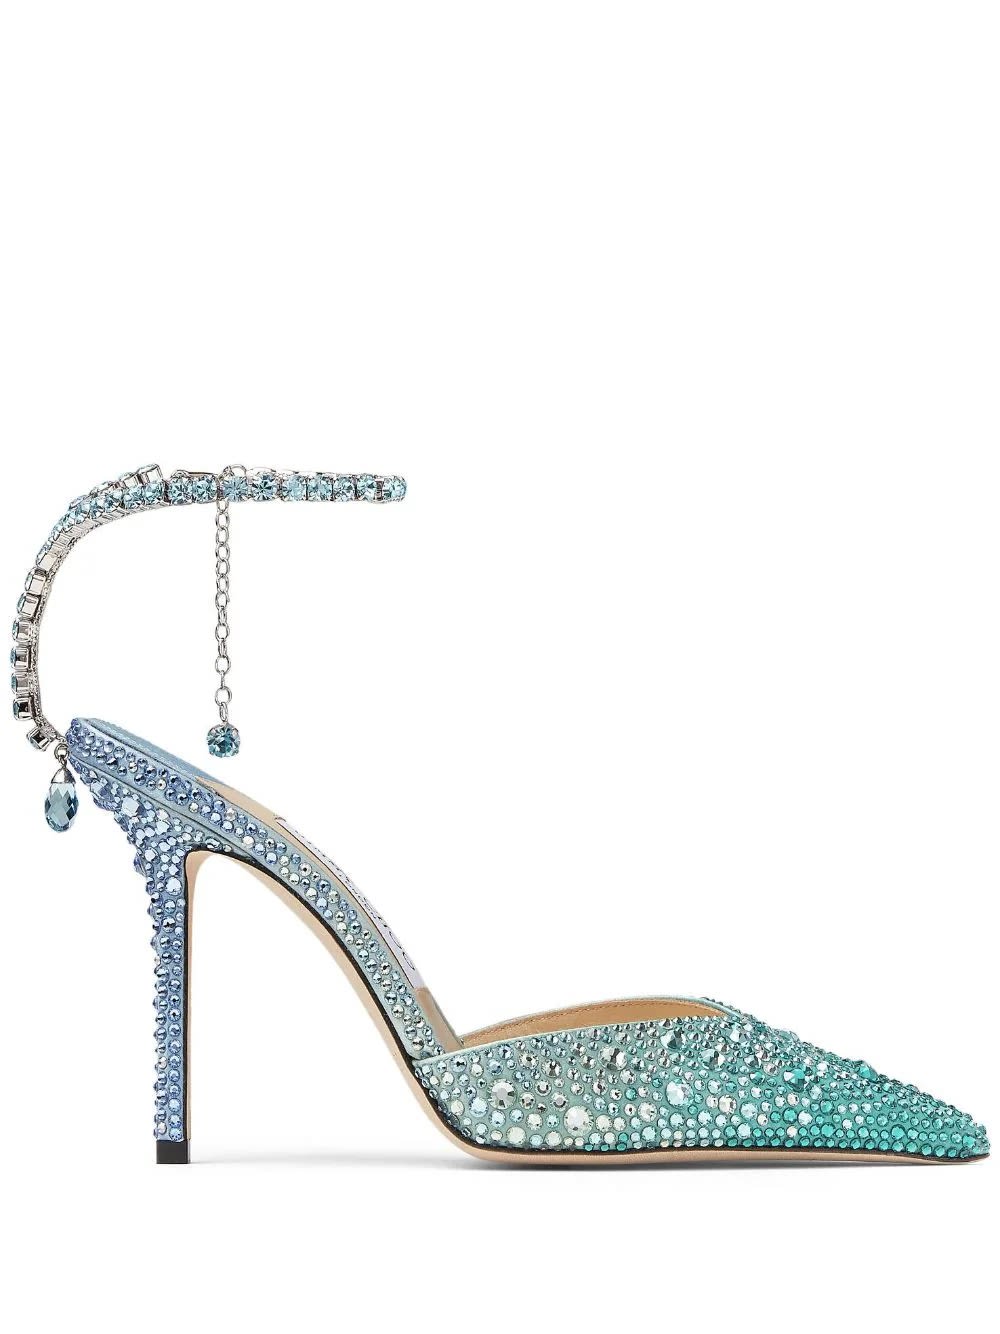 JIMMY CHOO SAEDA 100 PUMPS IN BLUE PEACOCK WITH CRYSTALS